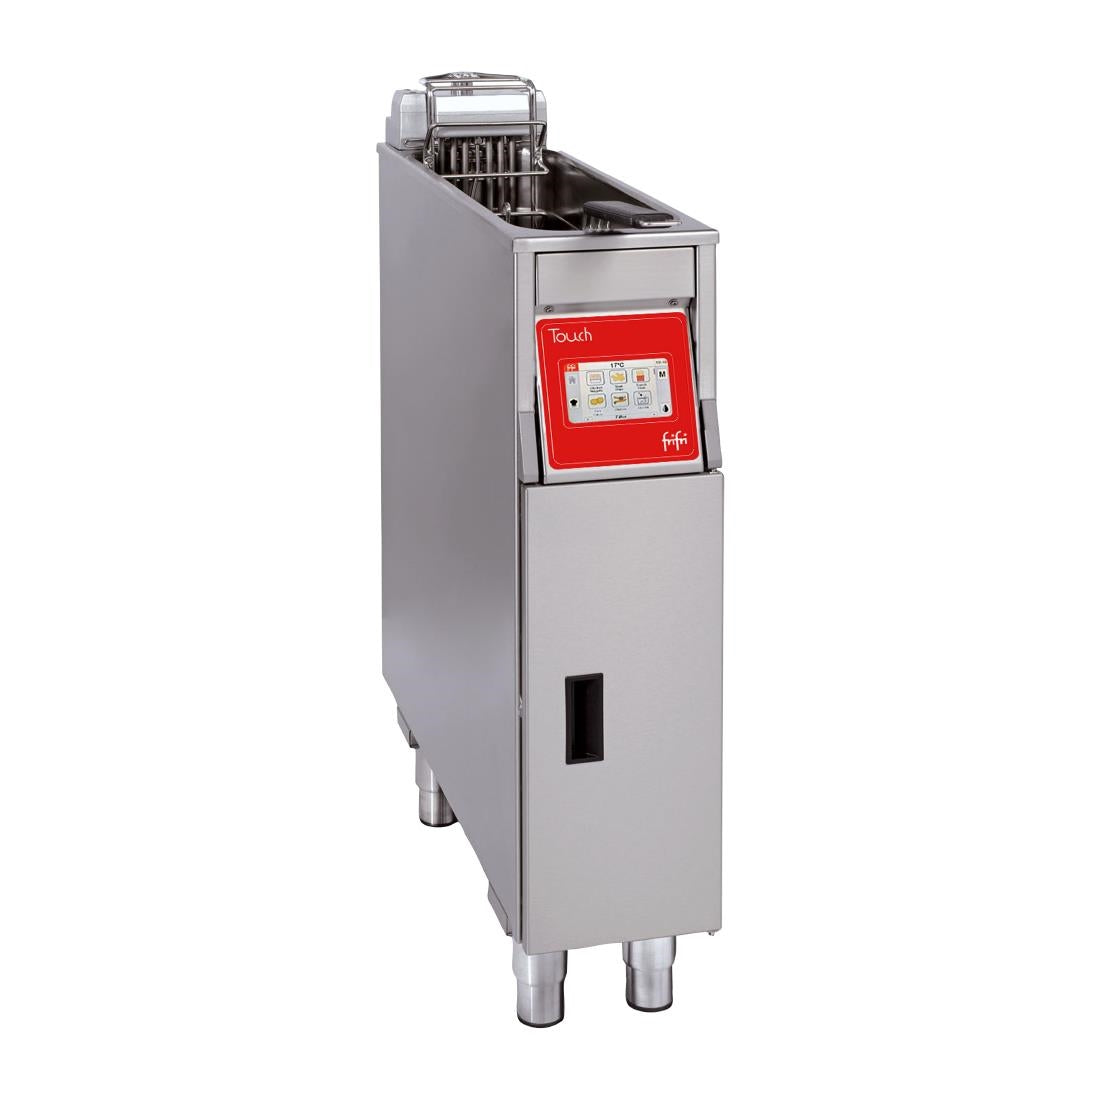 CX895 FriFri Touch 211 Electric Free Standing Single Tank Filtration Fryer TL211M31G0 JD Catering Equipment Solutions Ltd